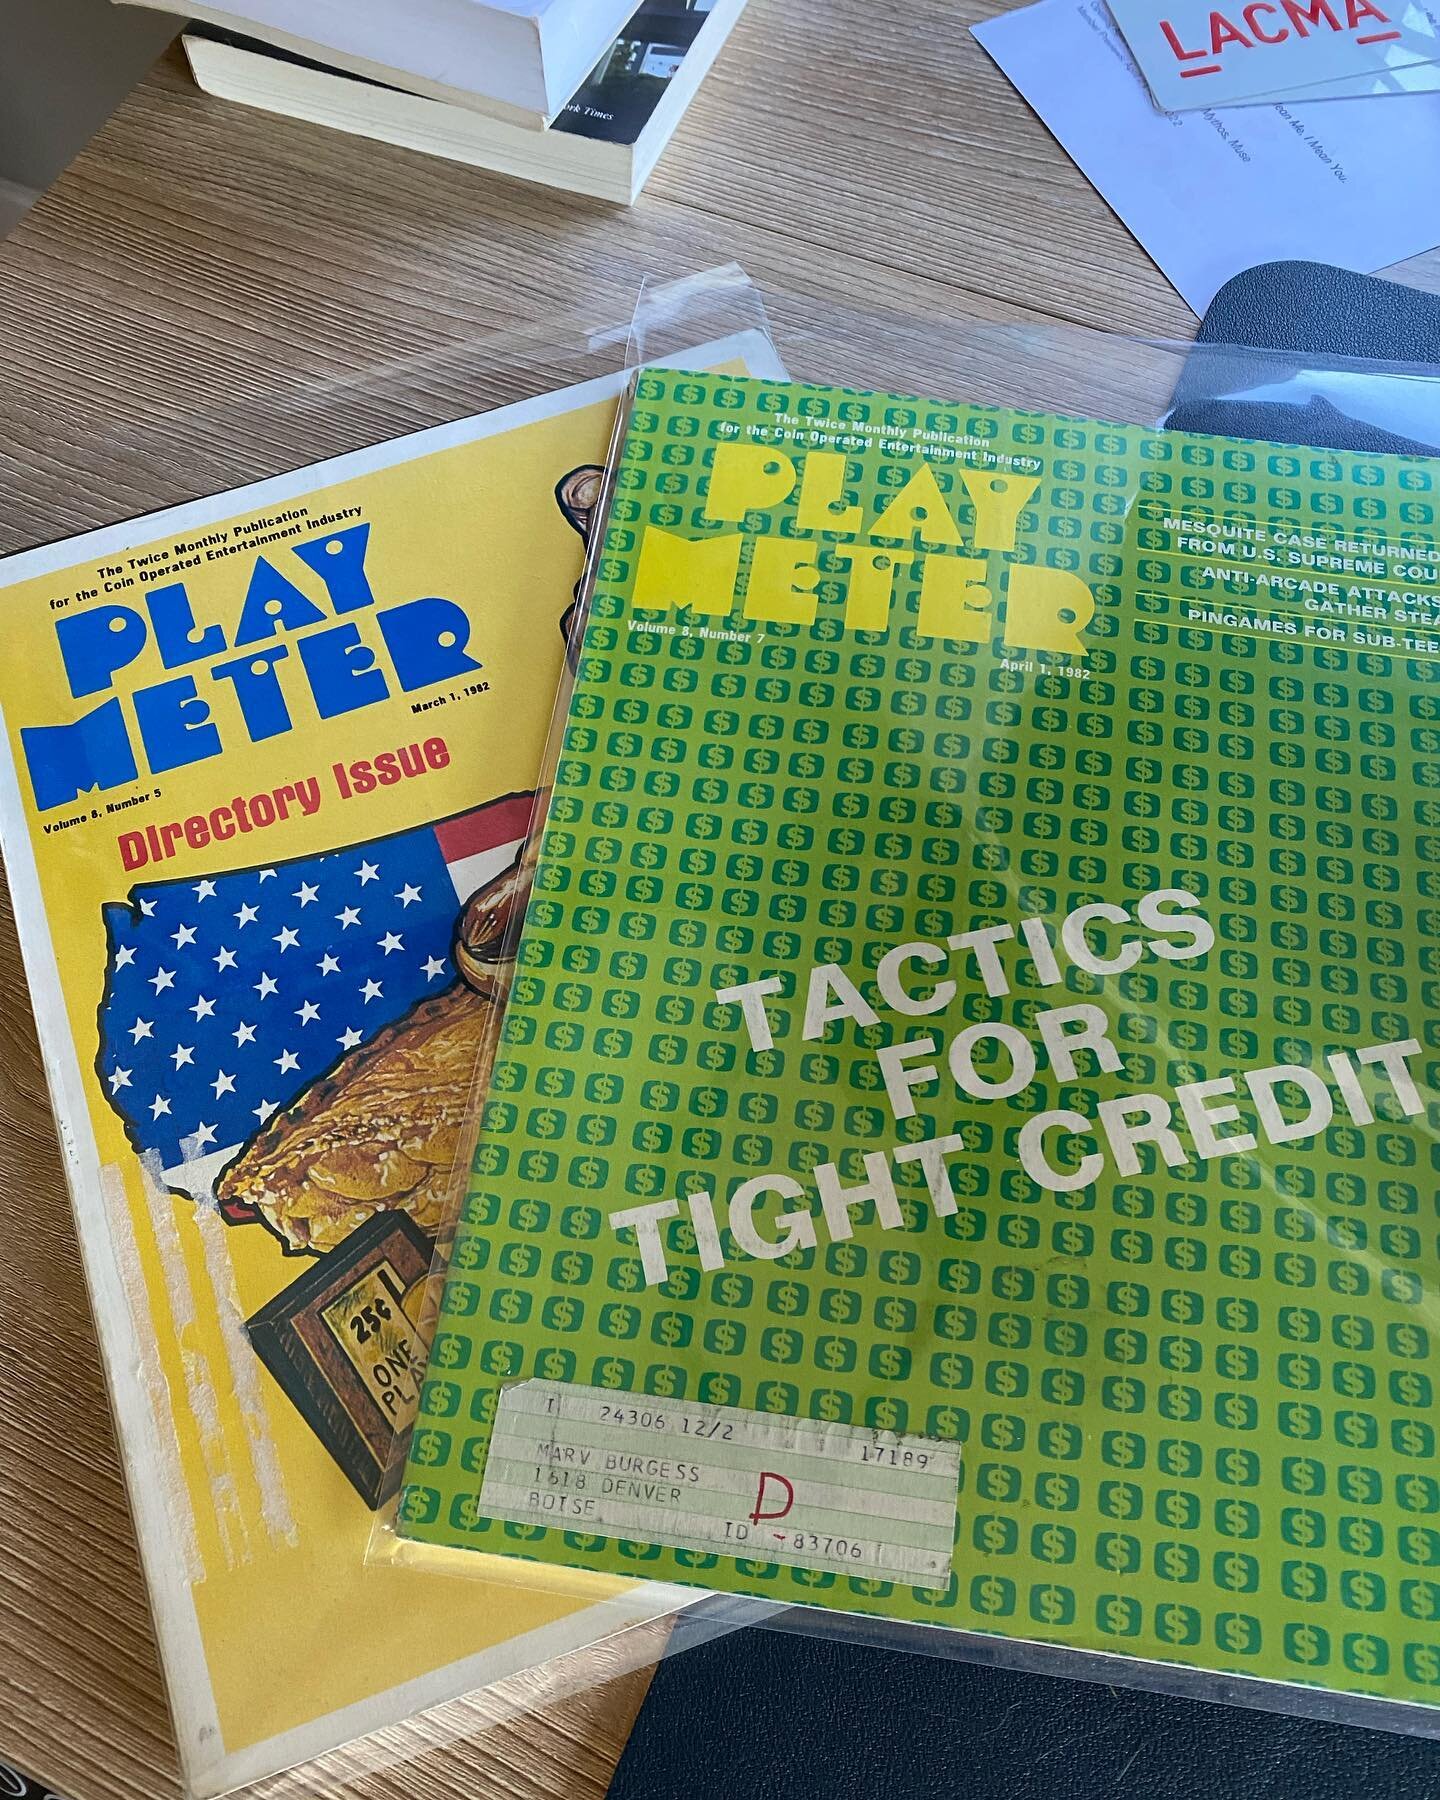 A few more &quot;Play Meters&quot; arrived today. We're working on a project that maps #arcades and arcade spaces in Los Angeles 1979 - 1986 and these have been an invaluable source of route operator/distributor information. Unfortunately, many have 